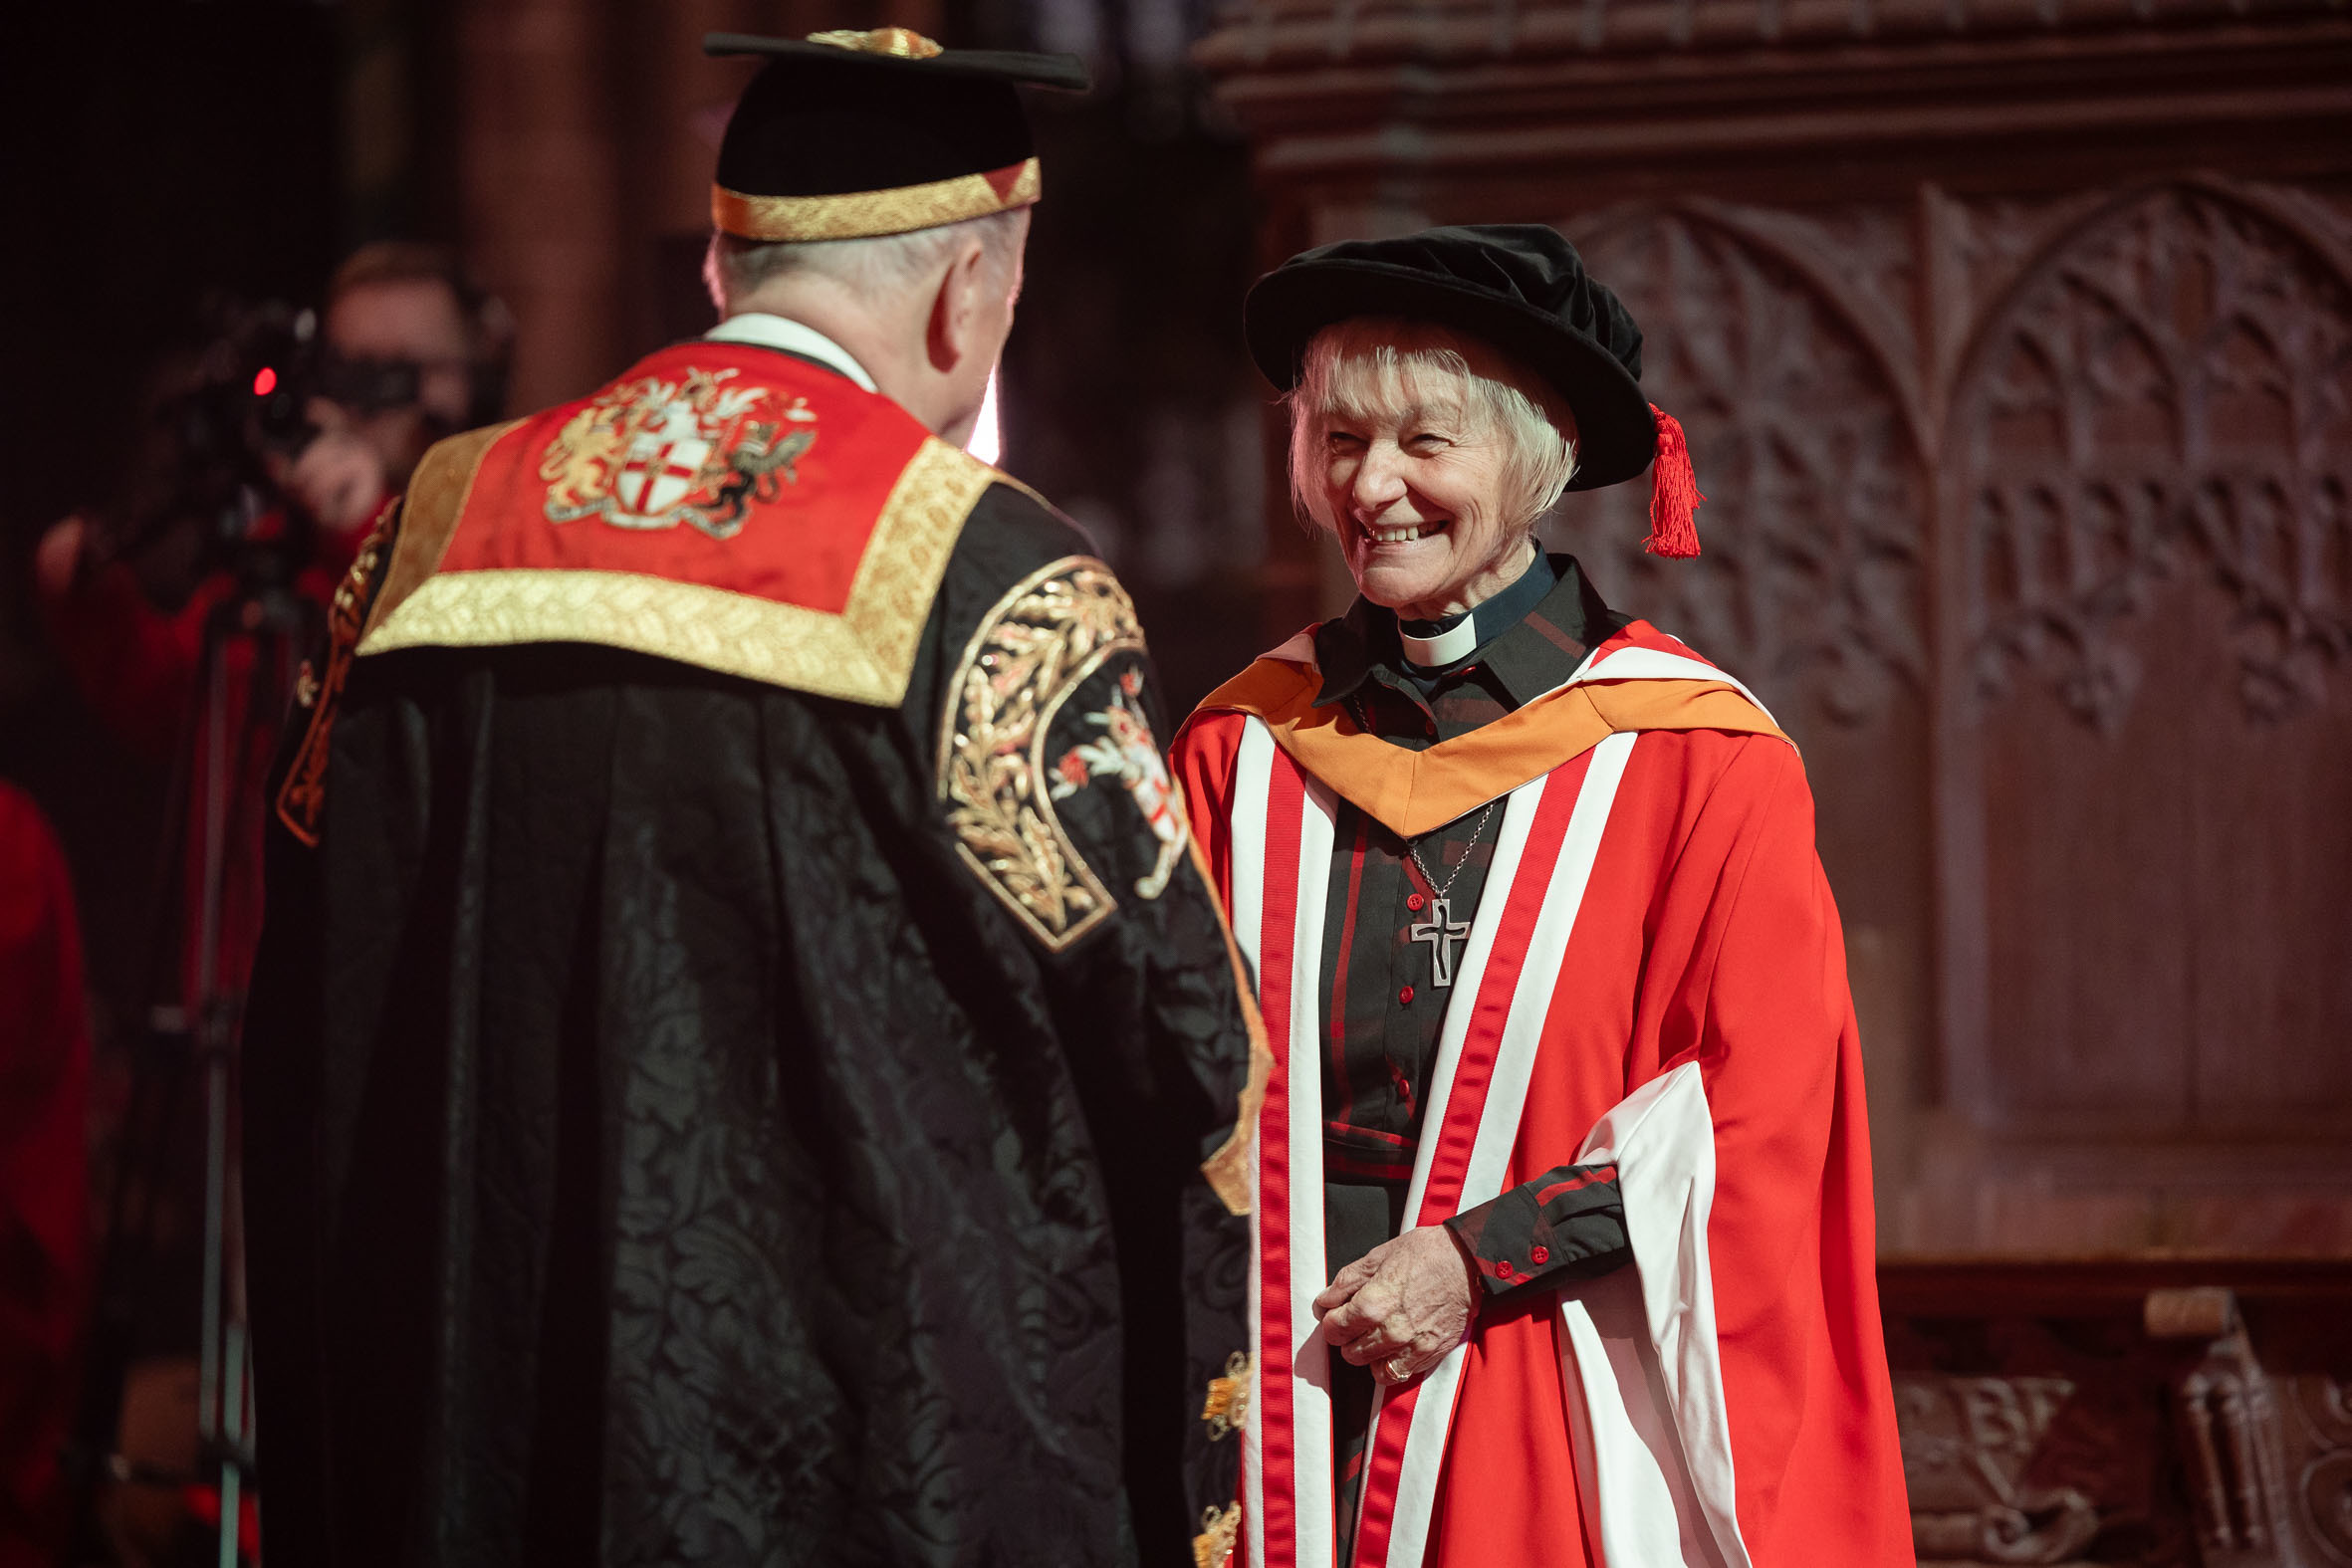 Canon Jane Brooke receiving her Honorary Doctor of Education from Dr Gyles Brandreth.